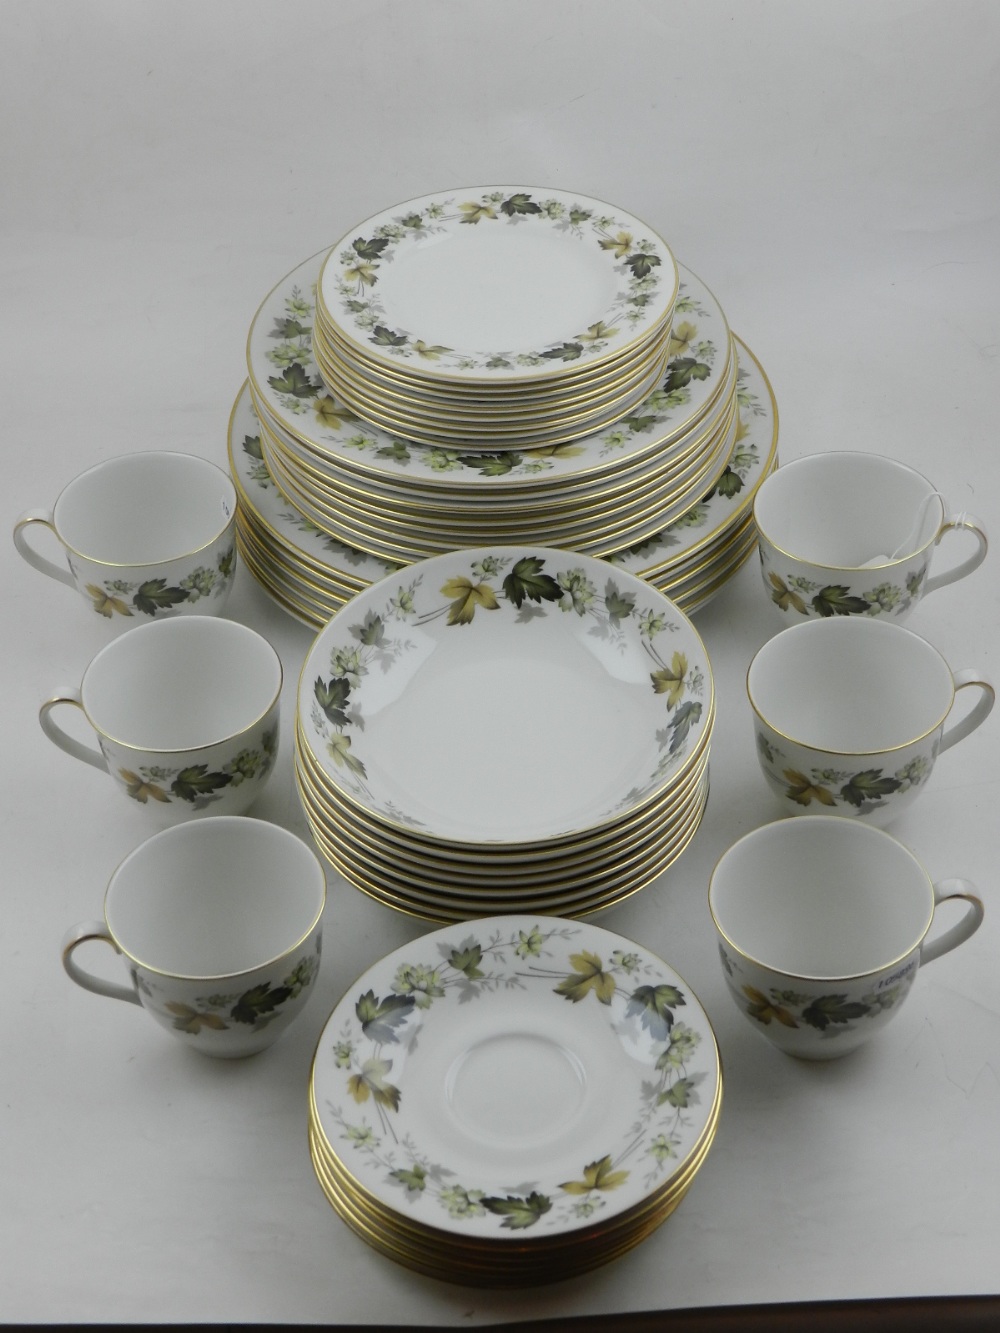 A Royal Doulton part dinner / tea service, pattern Larchmont, the border decorated with a continuous